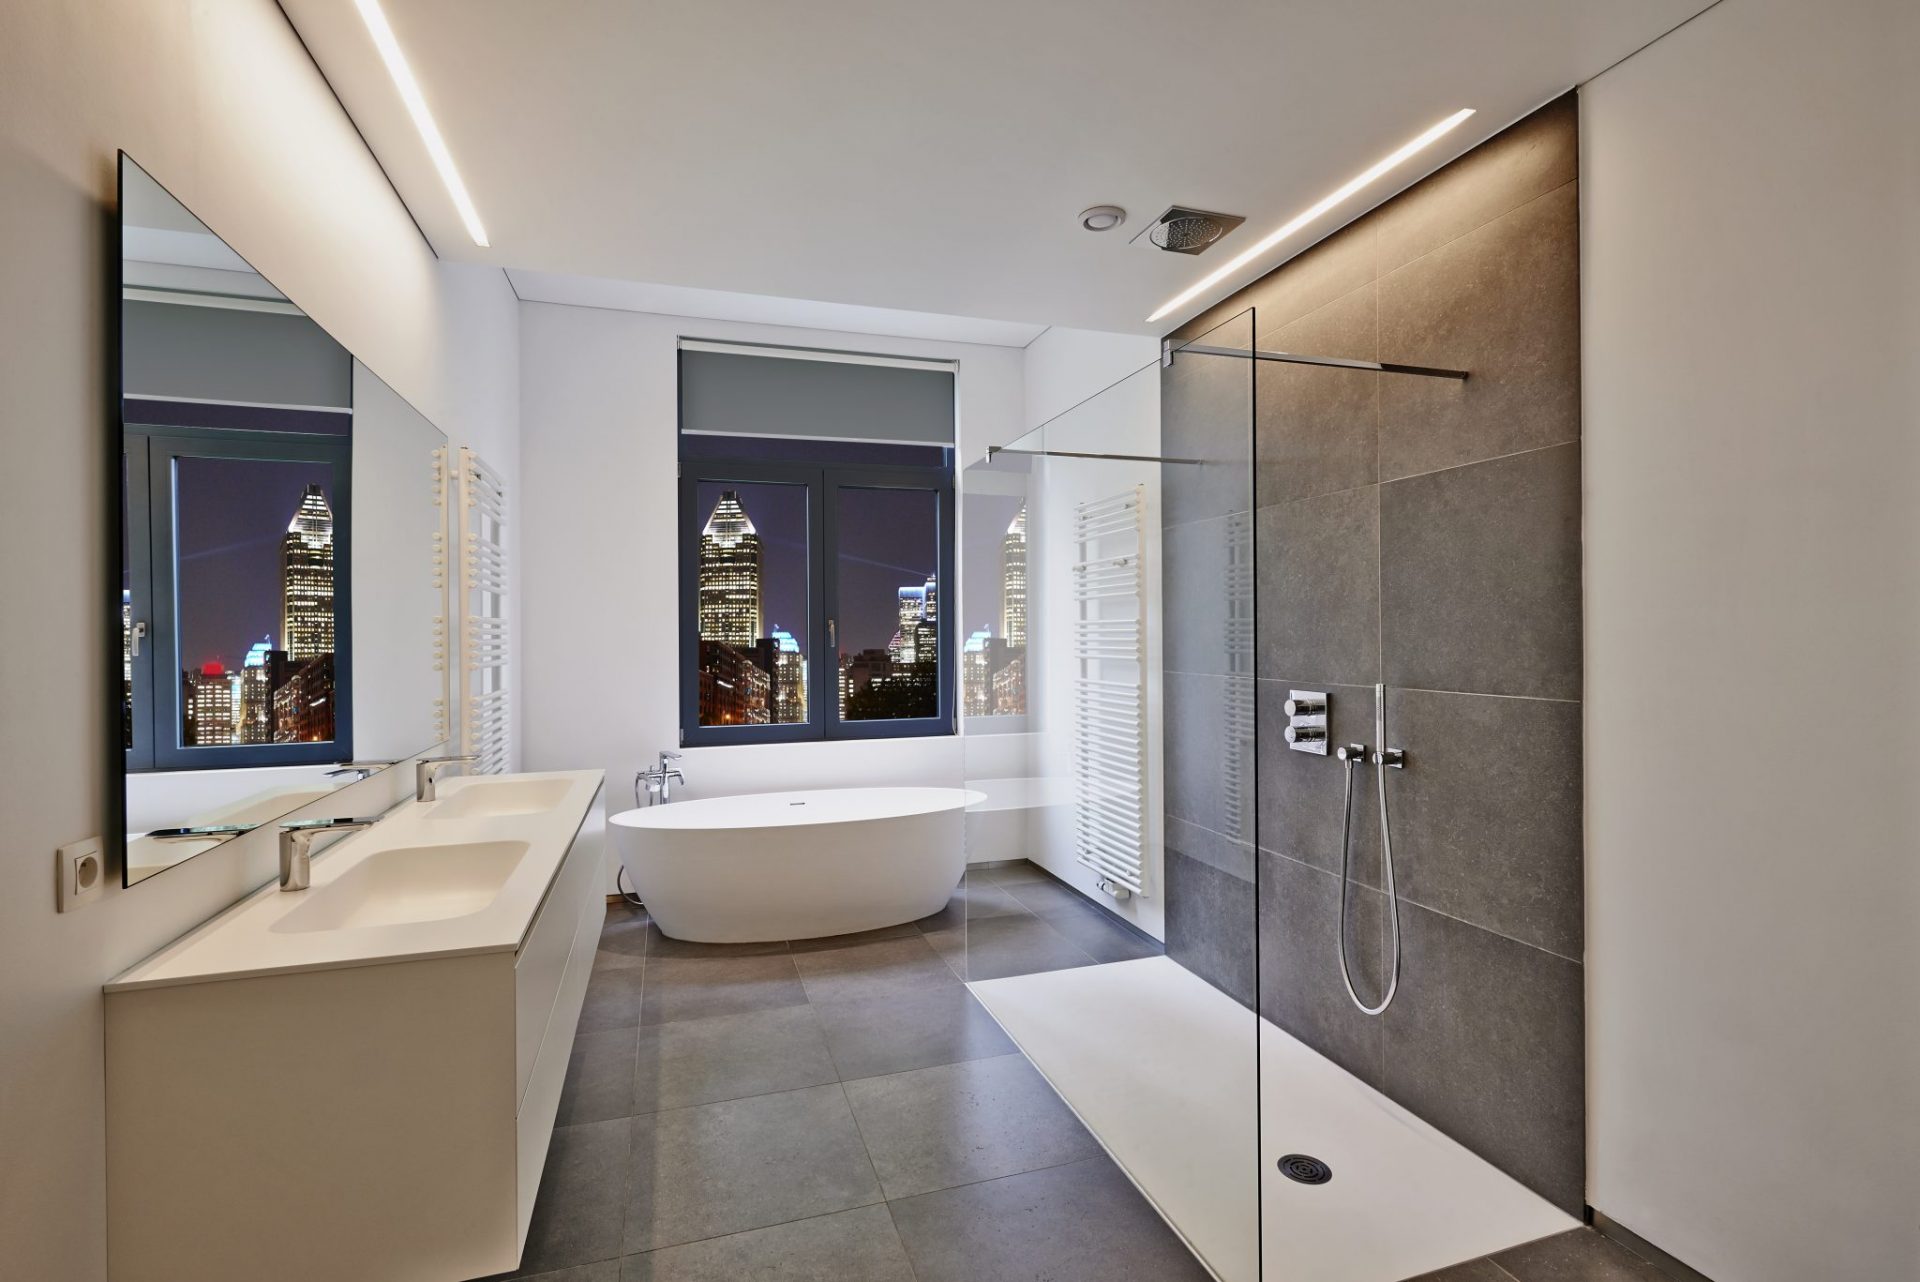 Bathtub In Corian Faucet And Shower In Tiled TPZJG2R